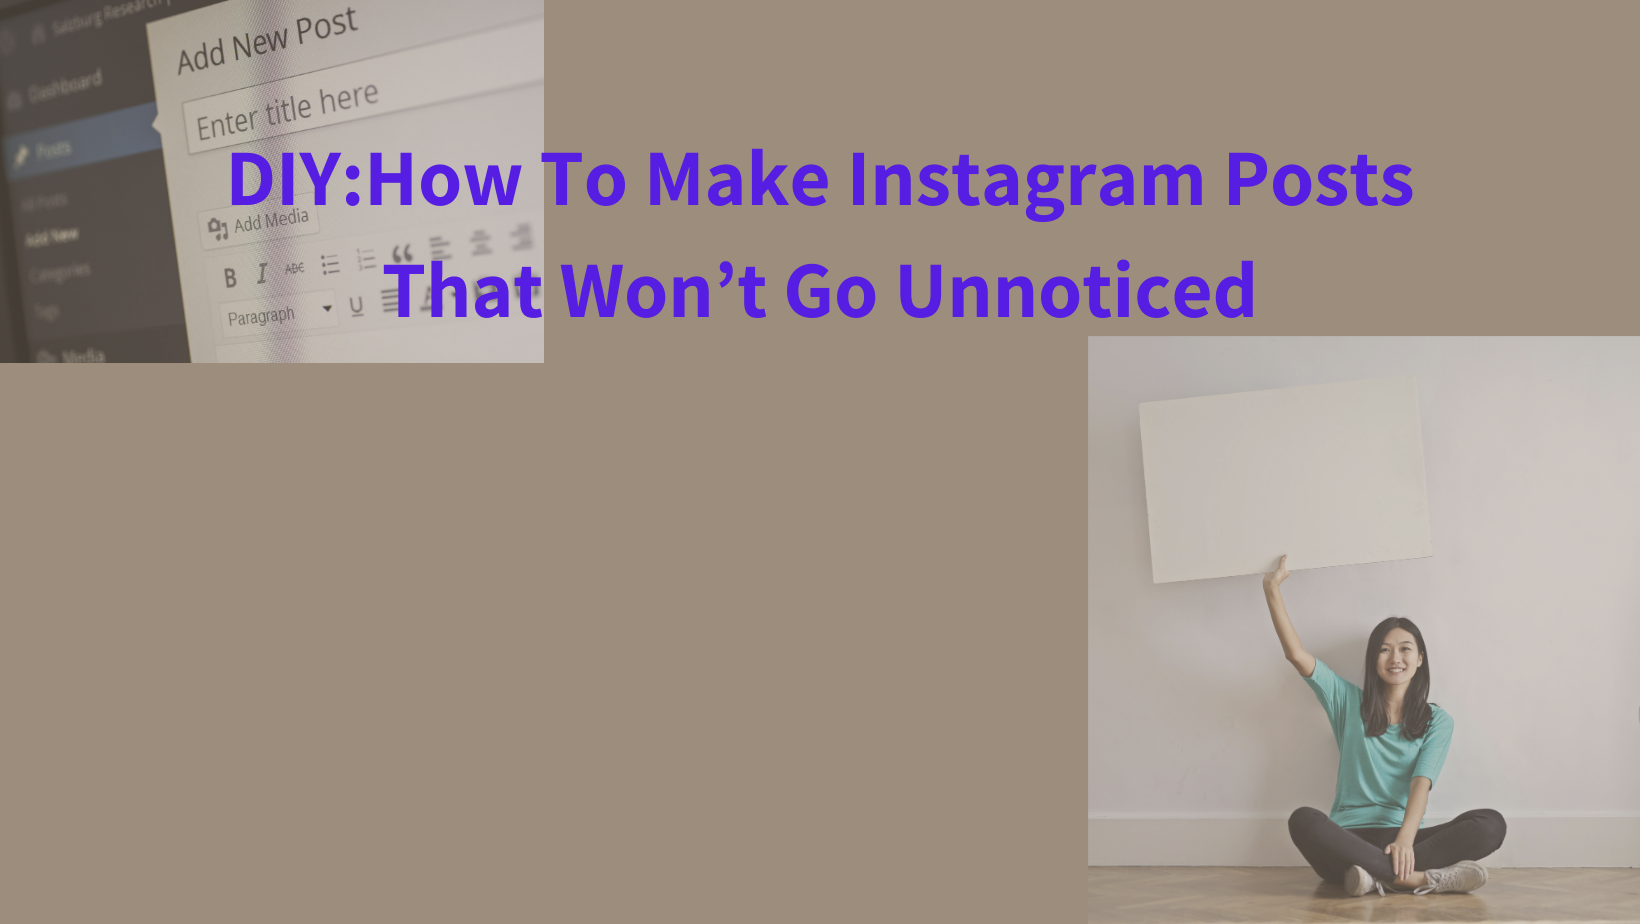 How To Make Instagram Posts That Won’t Go Unnoticed